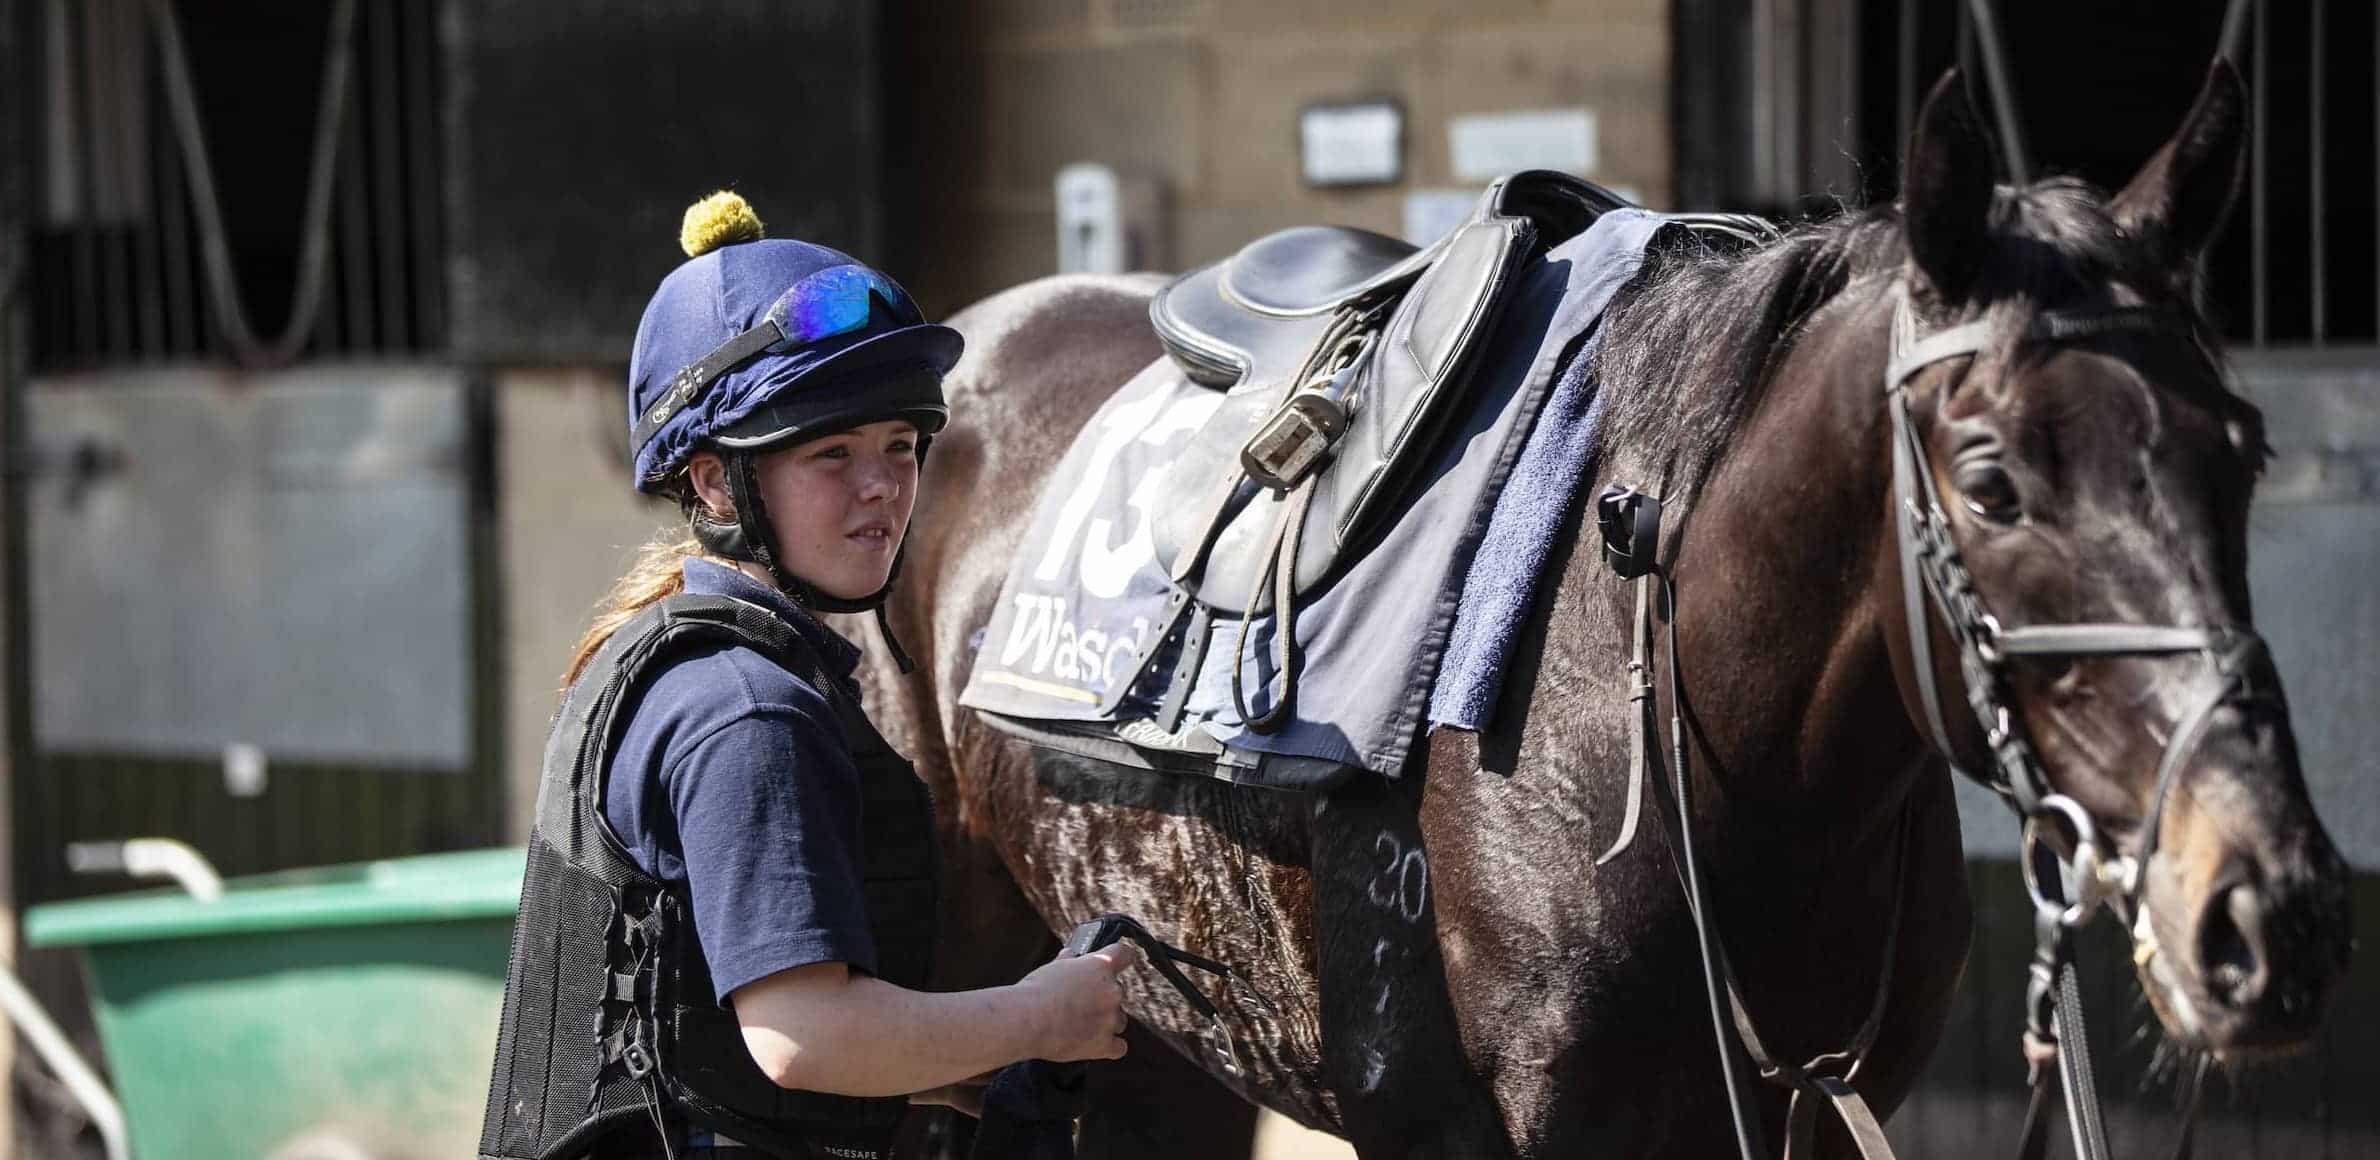 A Day in the Life of a Racehorse Trainer